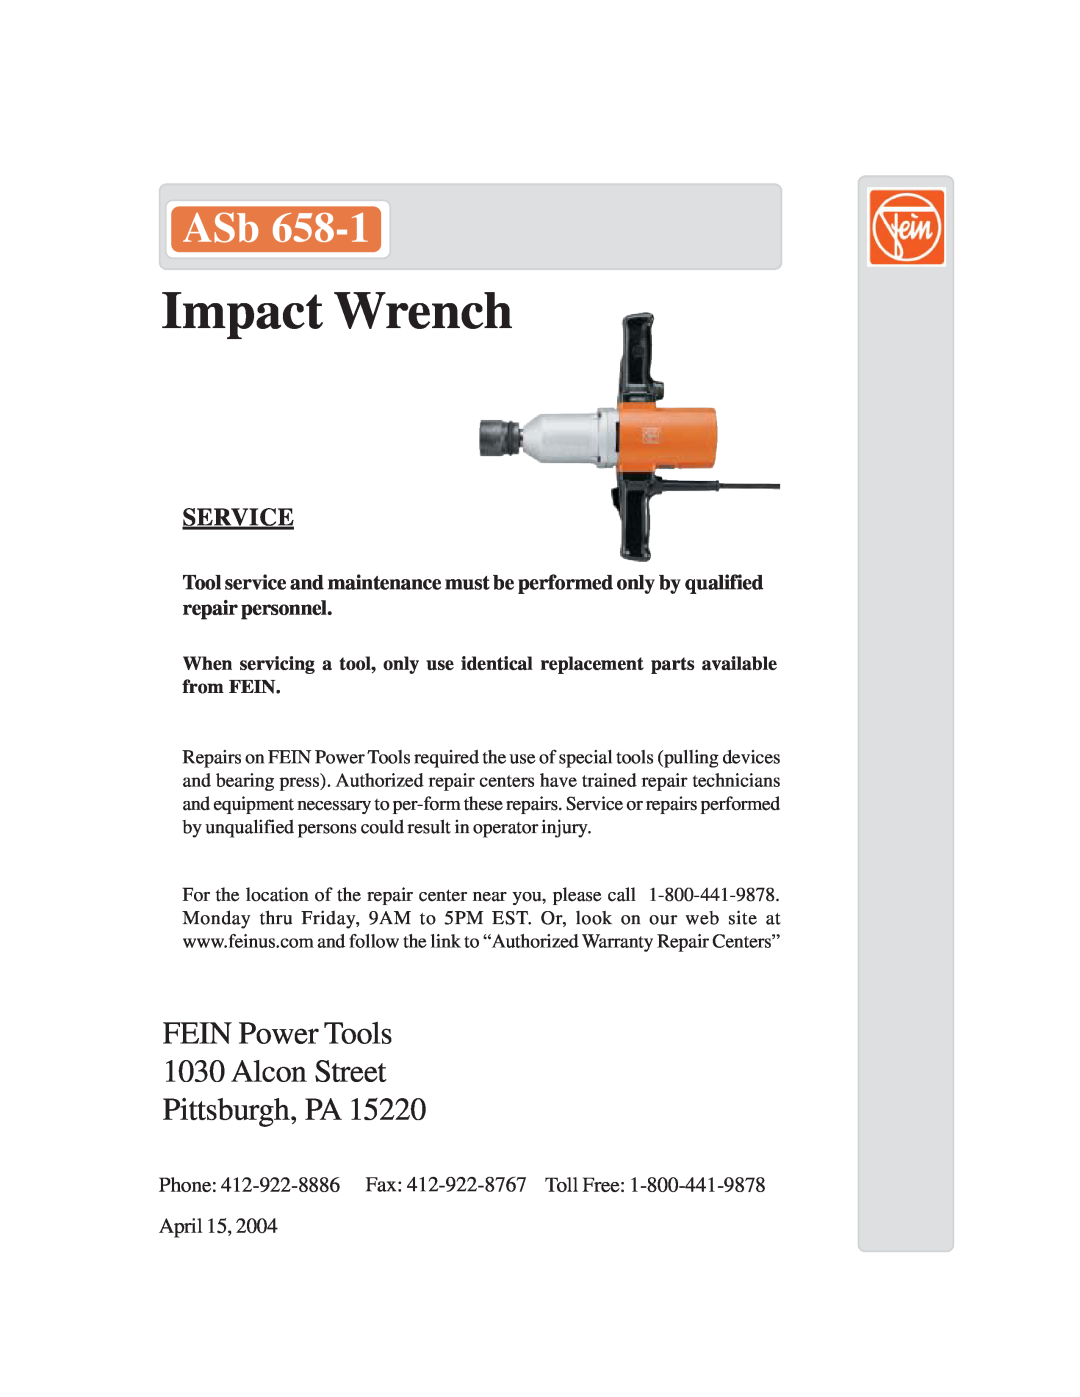 FEIN Power Tools ASB 658-1 warranty Impact Wrench, FEIN Power Tools 1030 Alcon Street Pittsburgh, PA, Service 